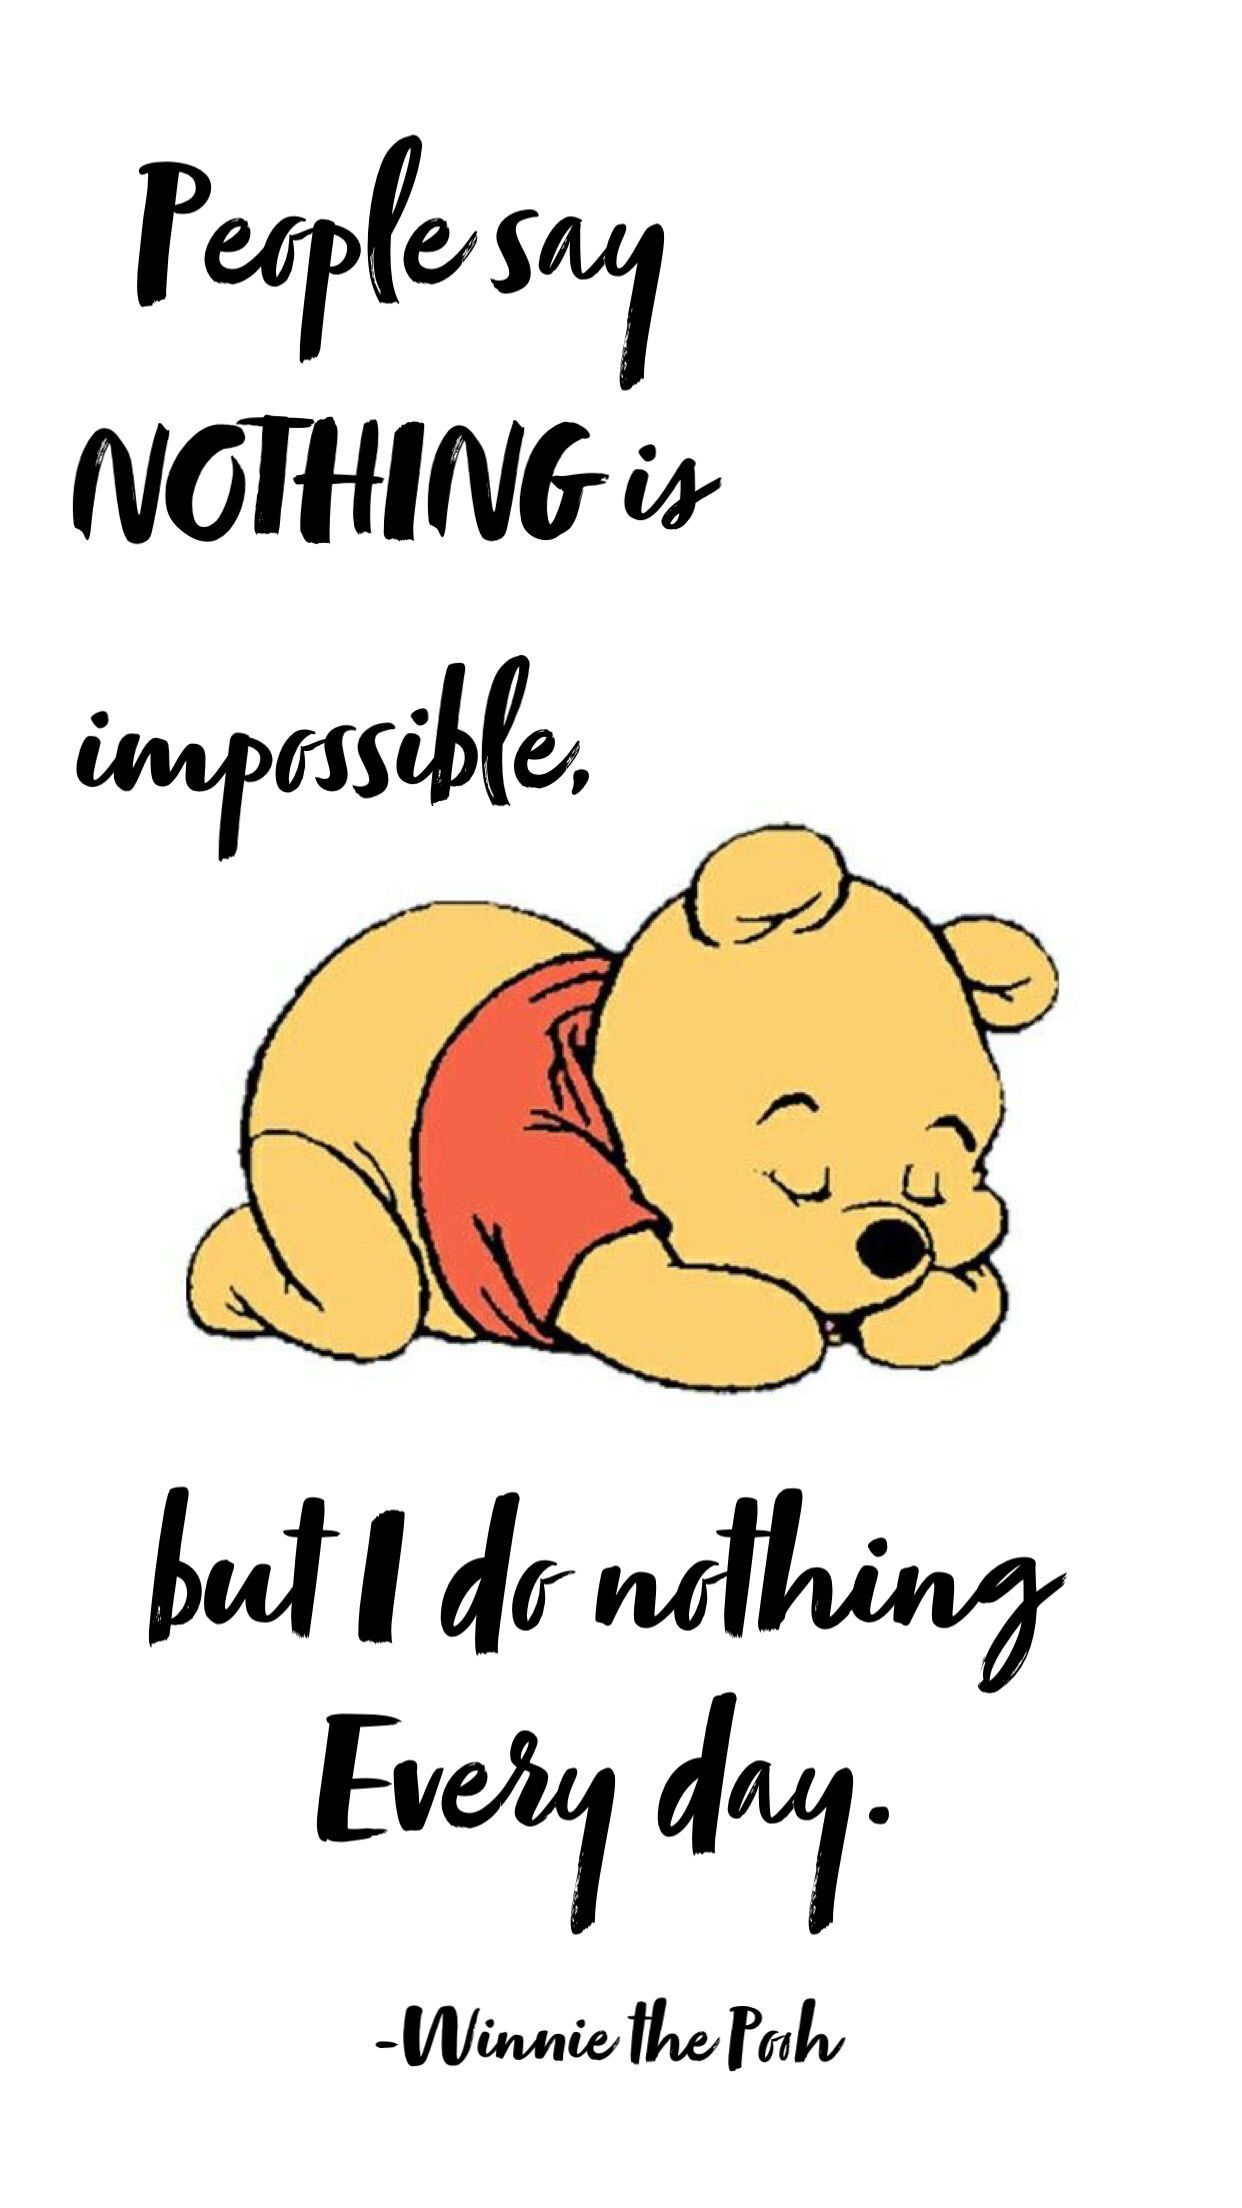 Winnie the Pooh Quotes Wallpaper. Disney quotes to live by, Inspirational quotes disney, Pooh quotes